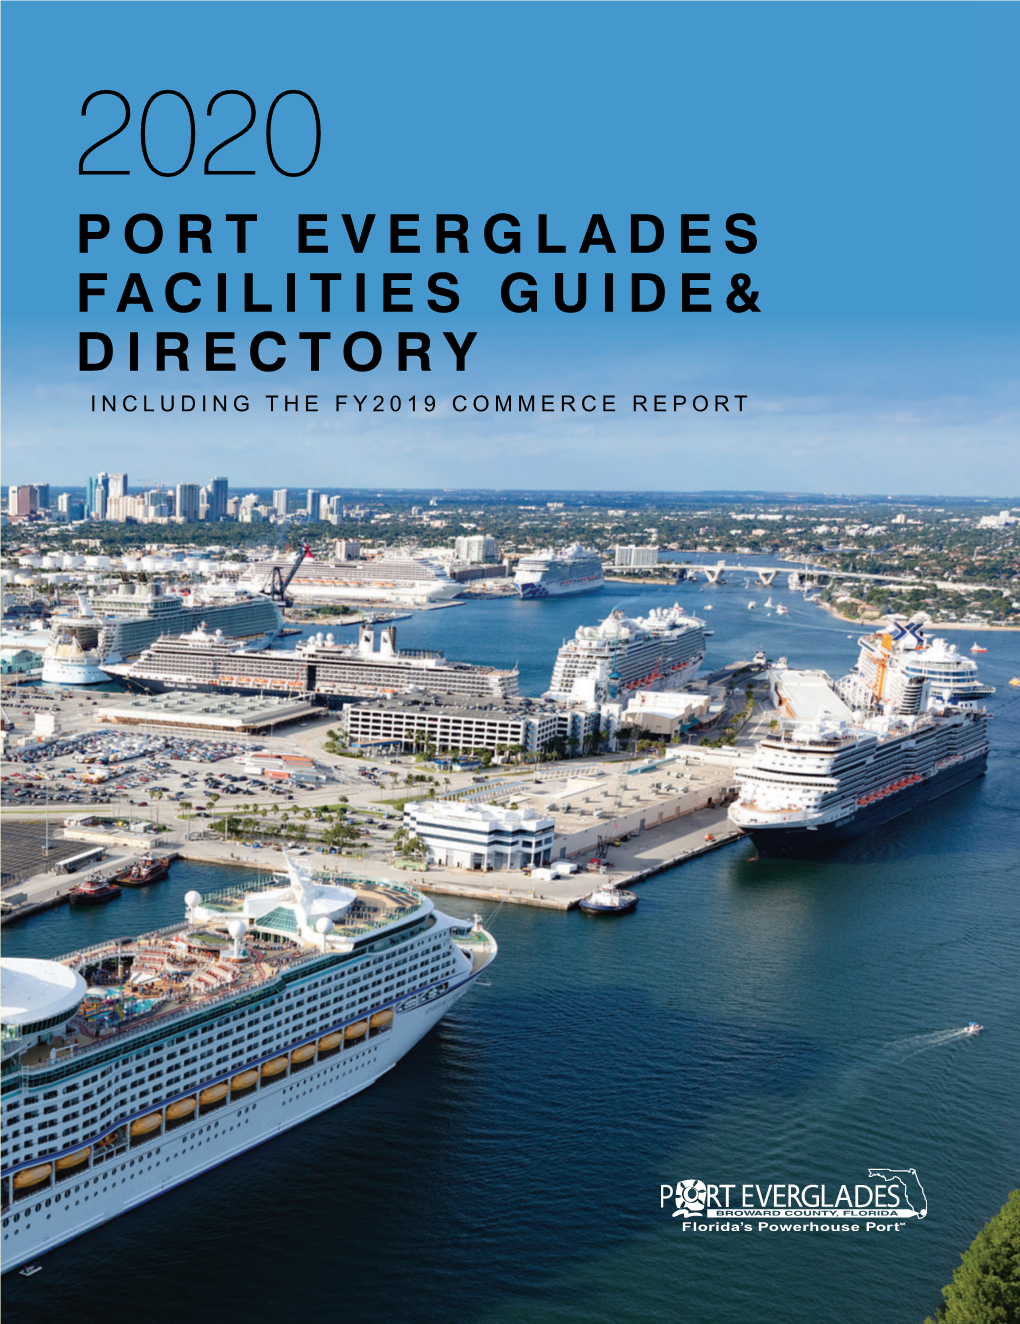 2020 Port Everglades Facilities Guide and Directory Including the FY2019